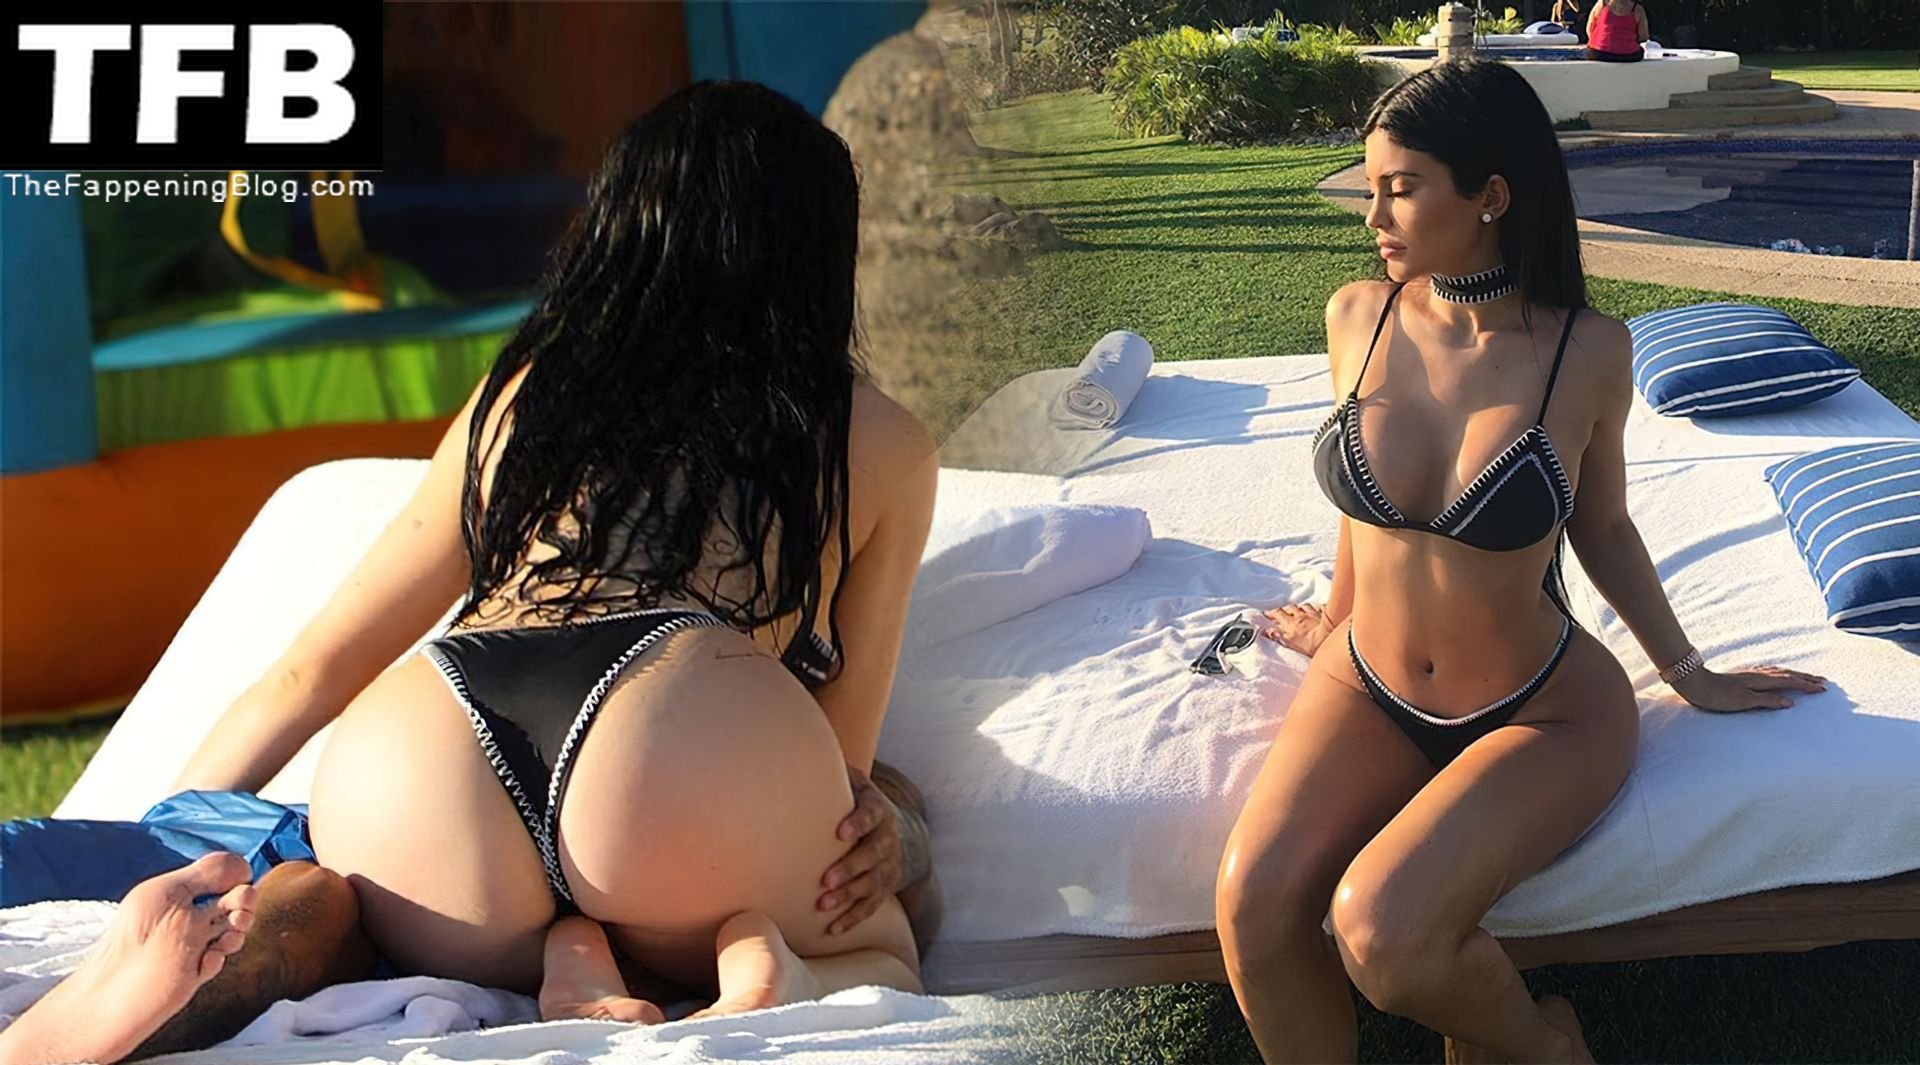 Sexy Pictures Of Kylie